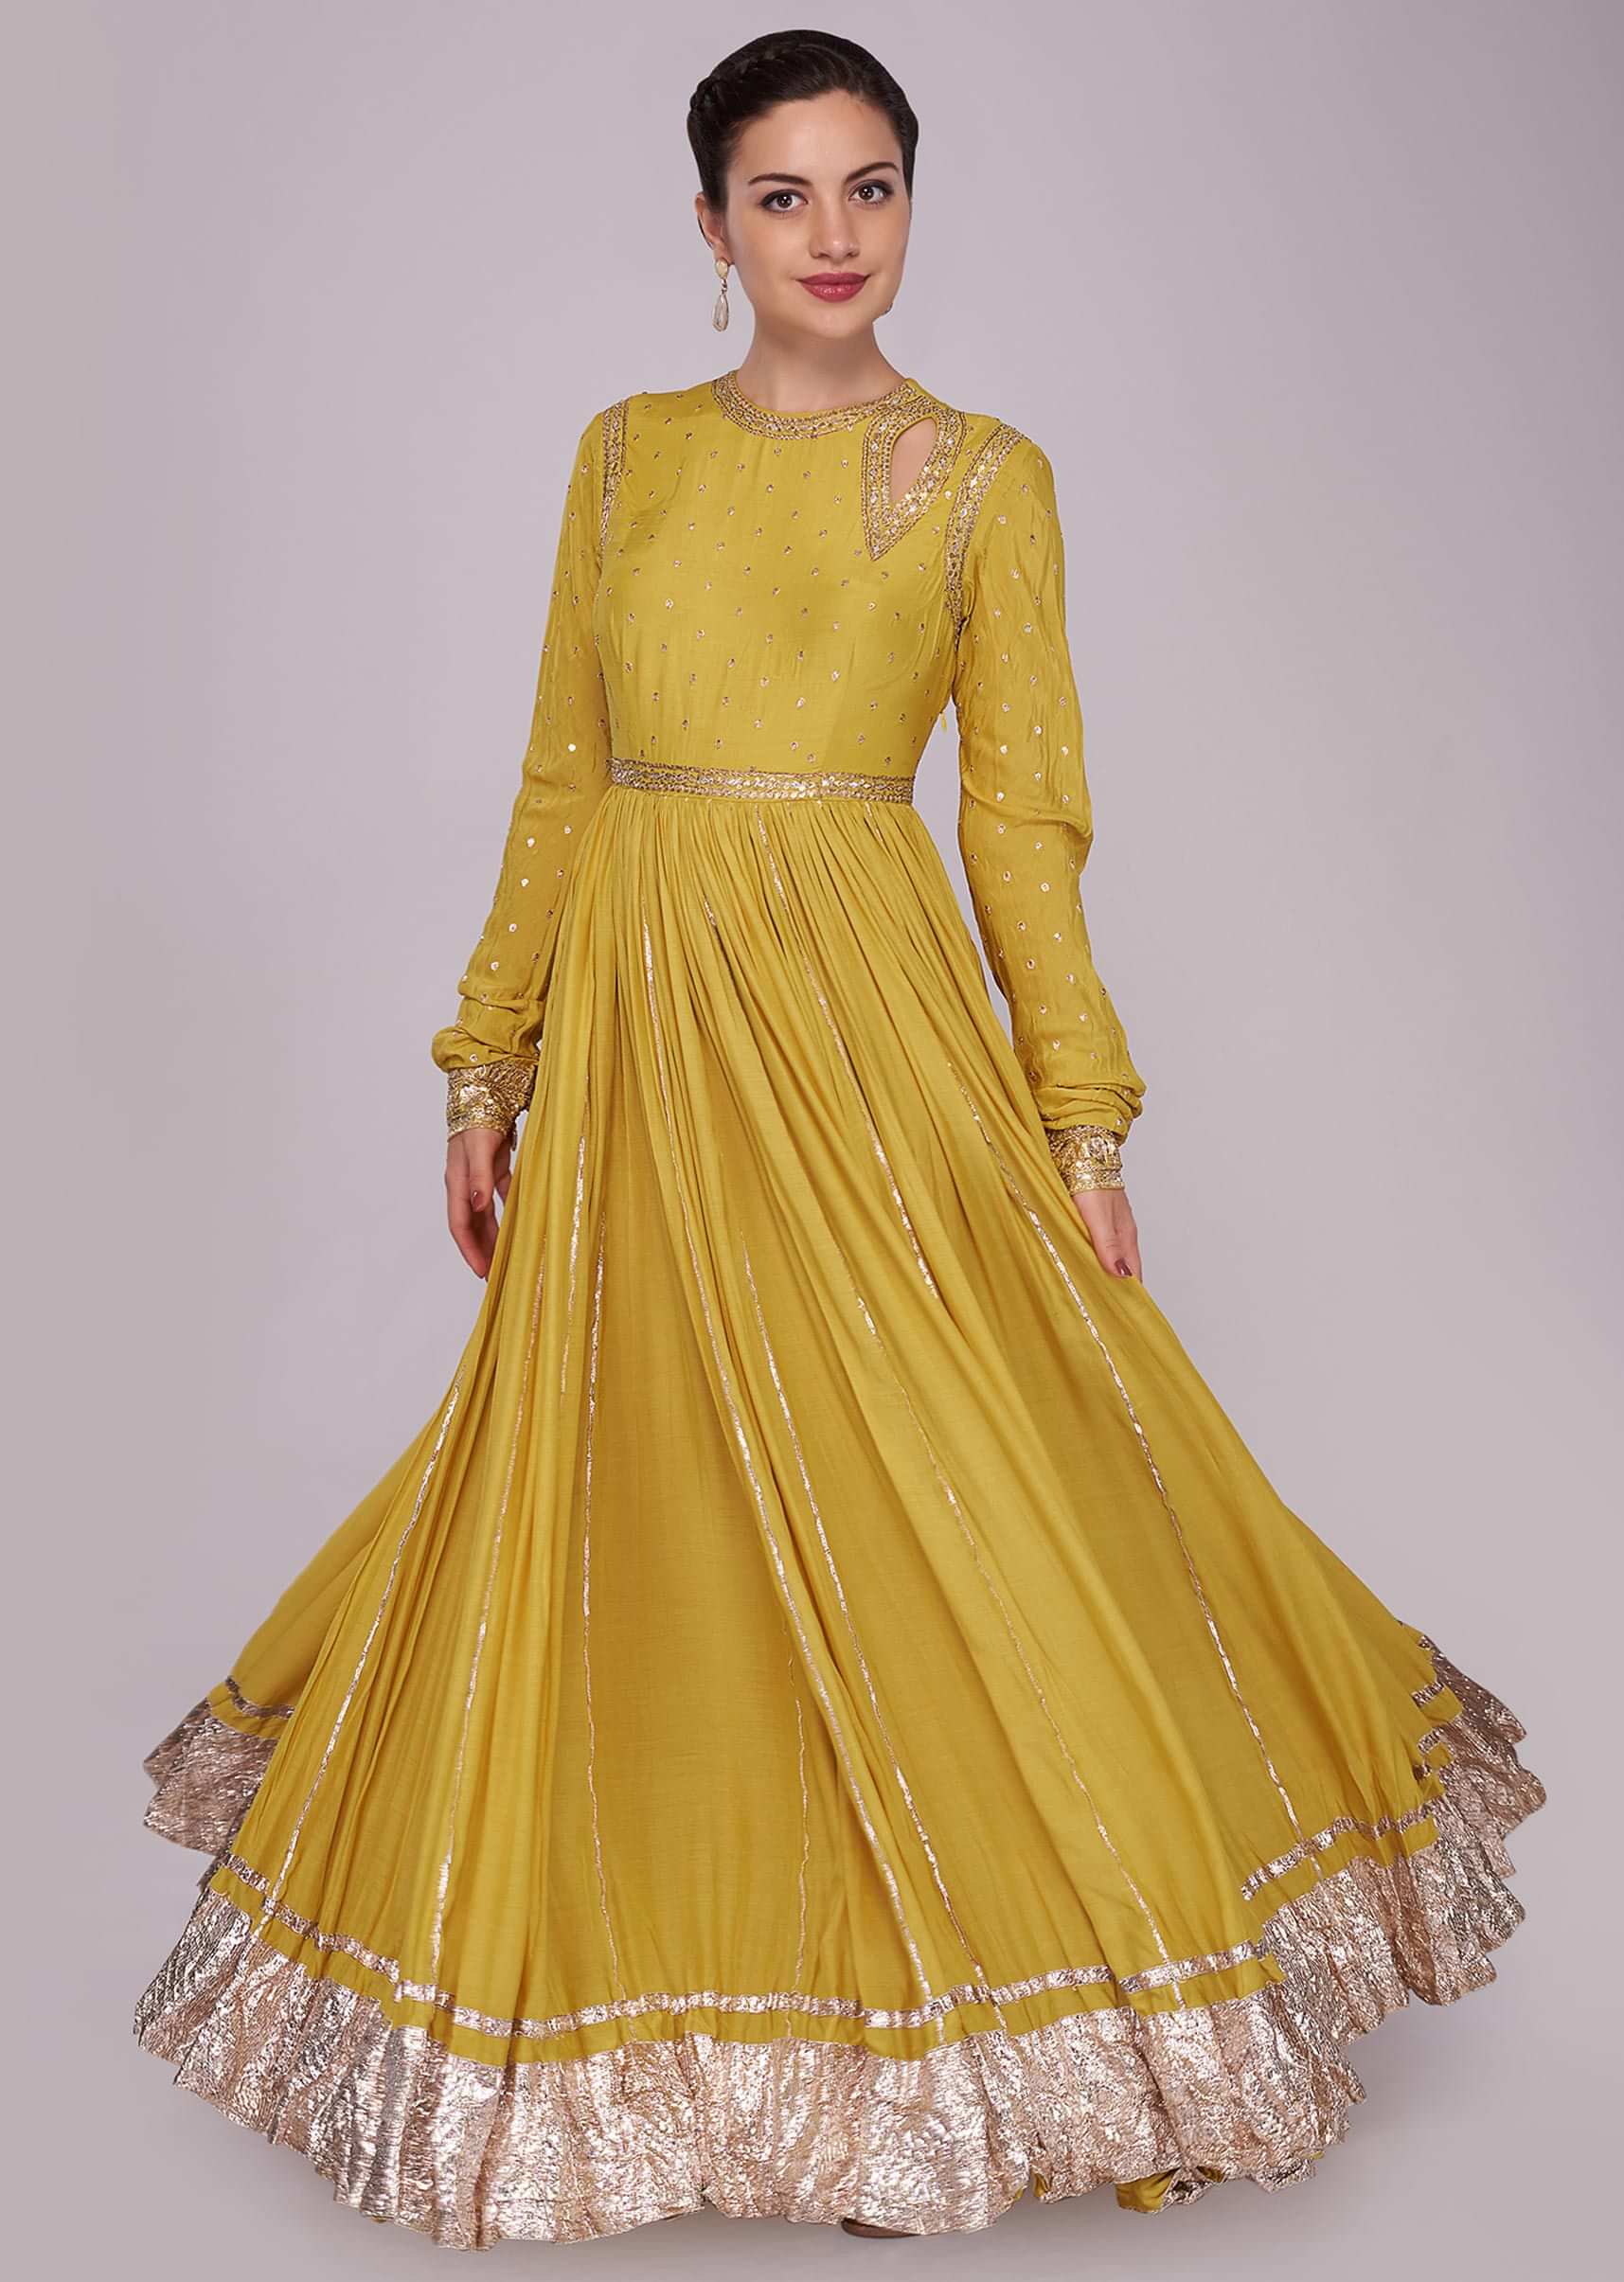 Tuscan yellow dress with embroidered bodice